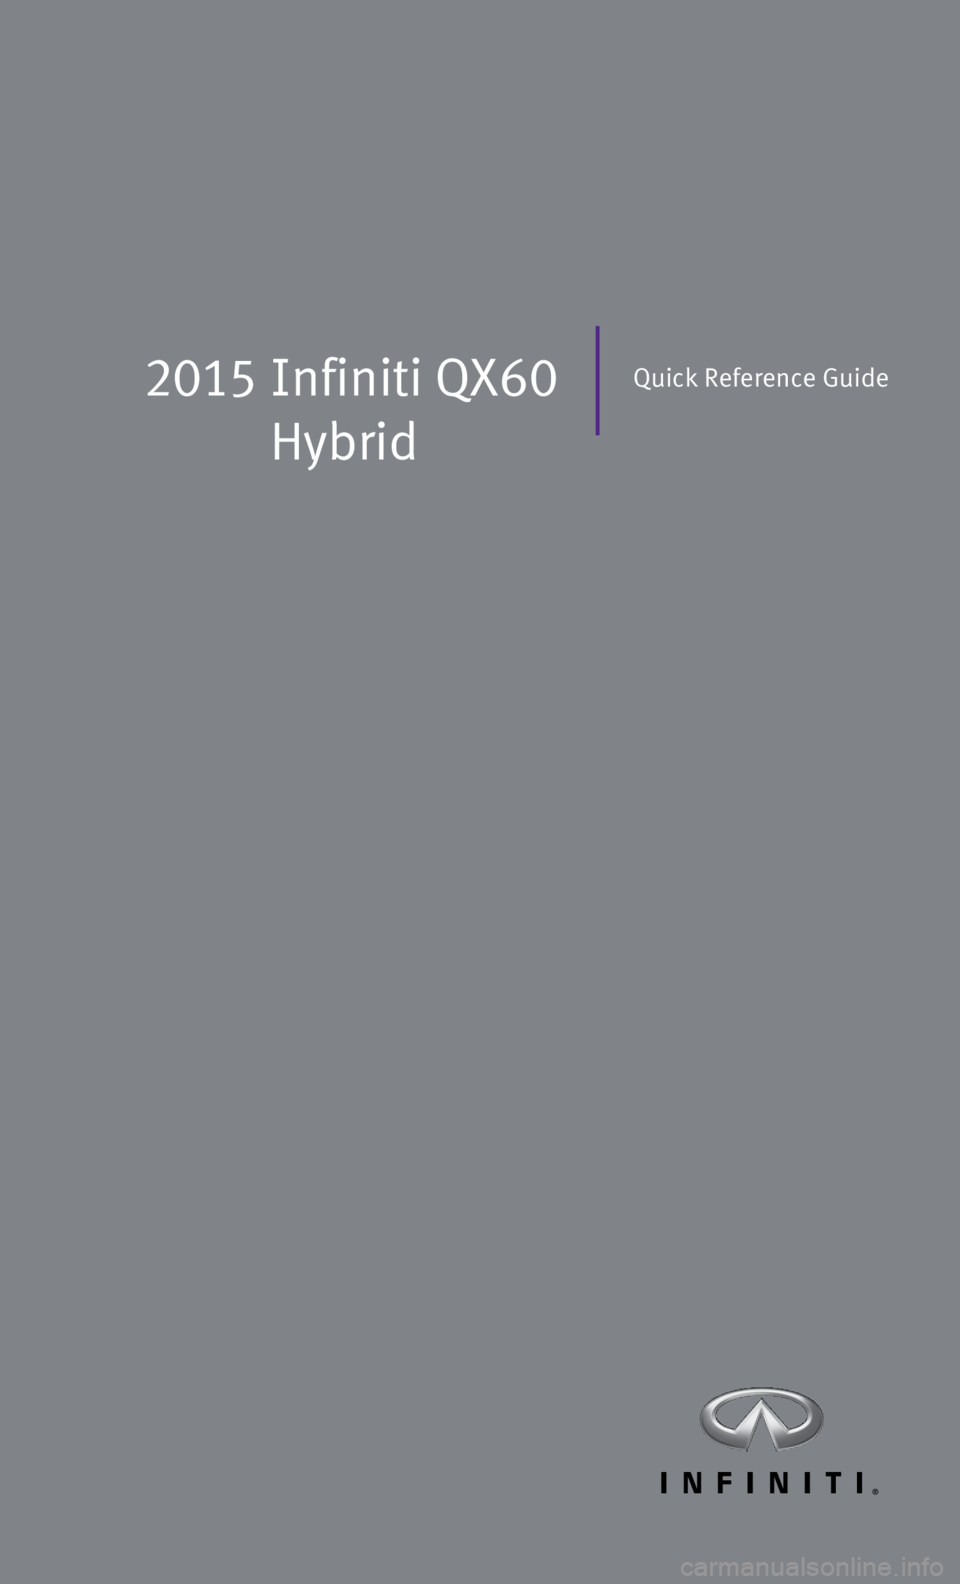 INFINITI QX60 HYBRID 2015  Quick Reference Guide 2015  Infiniti  QX60 
HybridQuick Reference Guide 